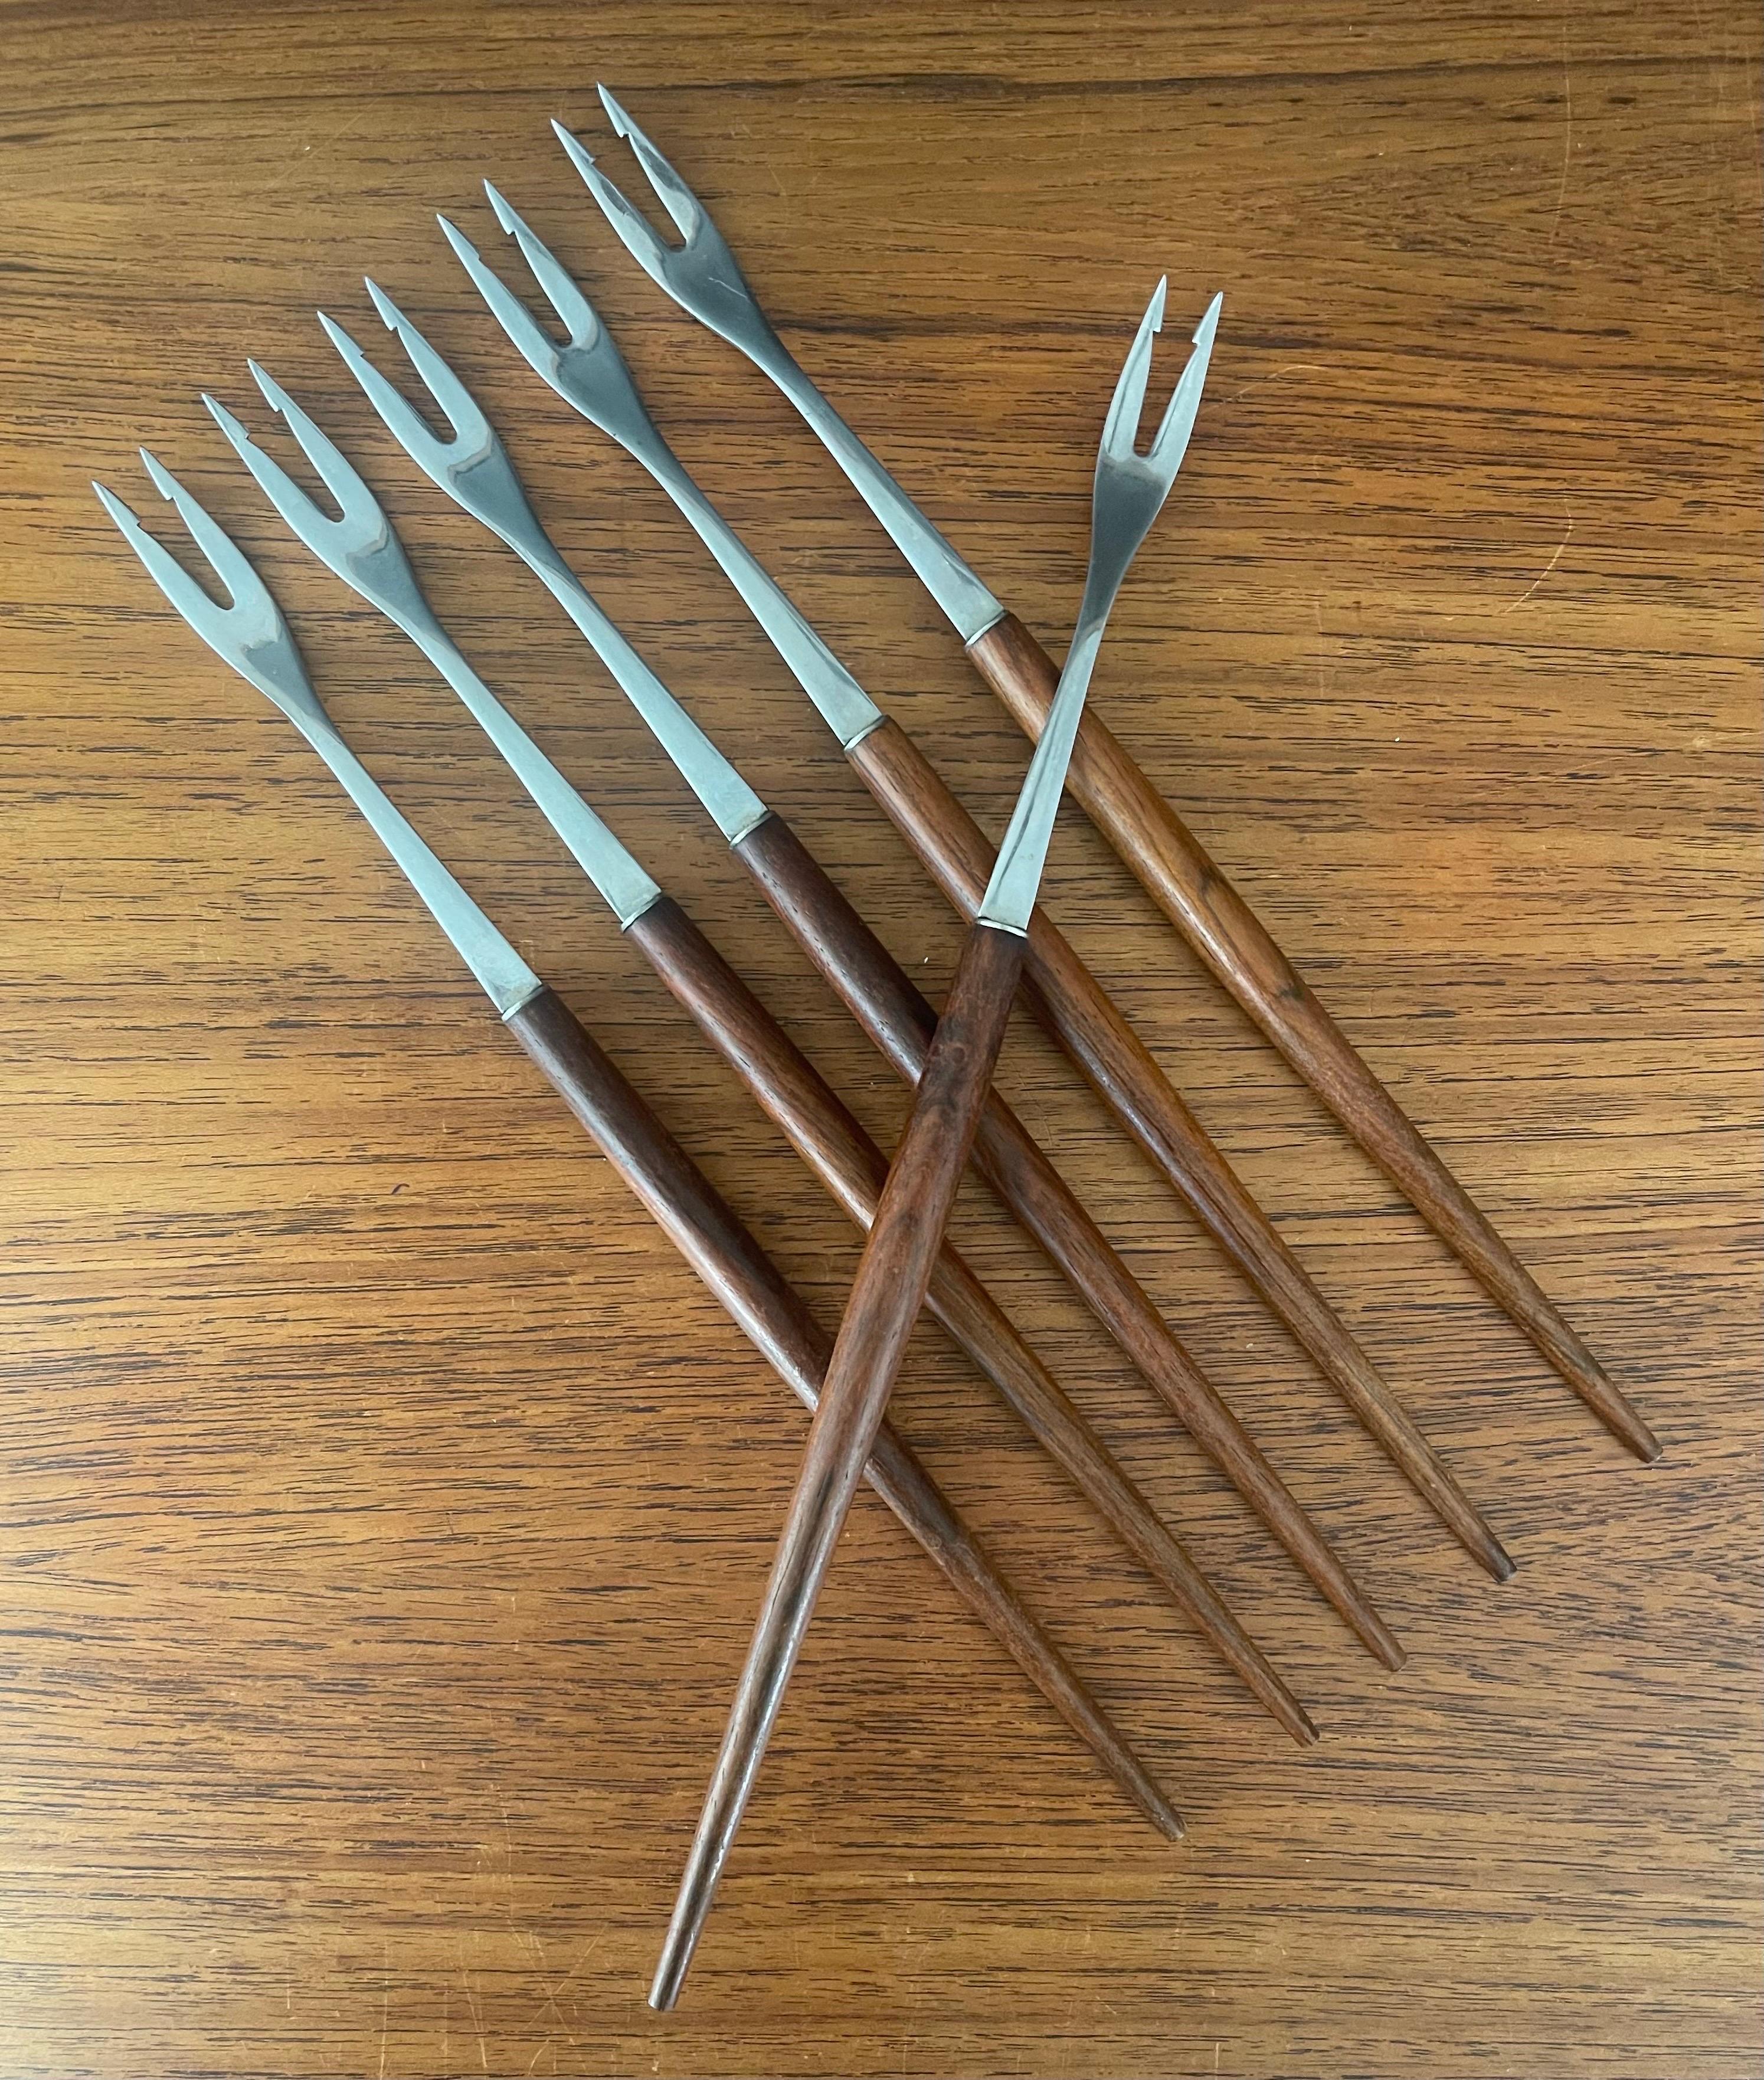 A nice Set of six MCM walnut and stainless steel fondue forks by Rostfrei of Germany, circa 1970s.  The set is in very good vintage condition and each fork is 12